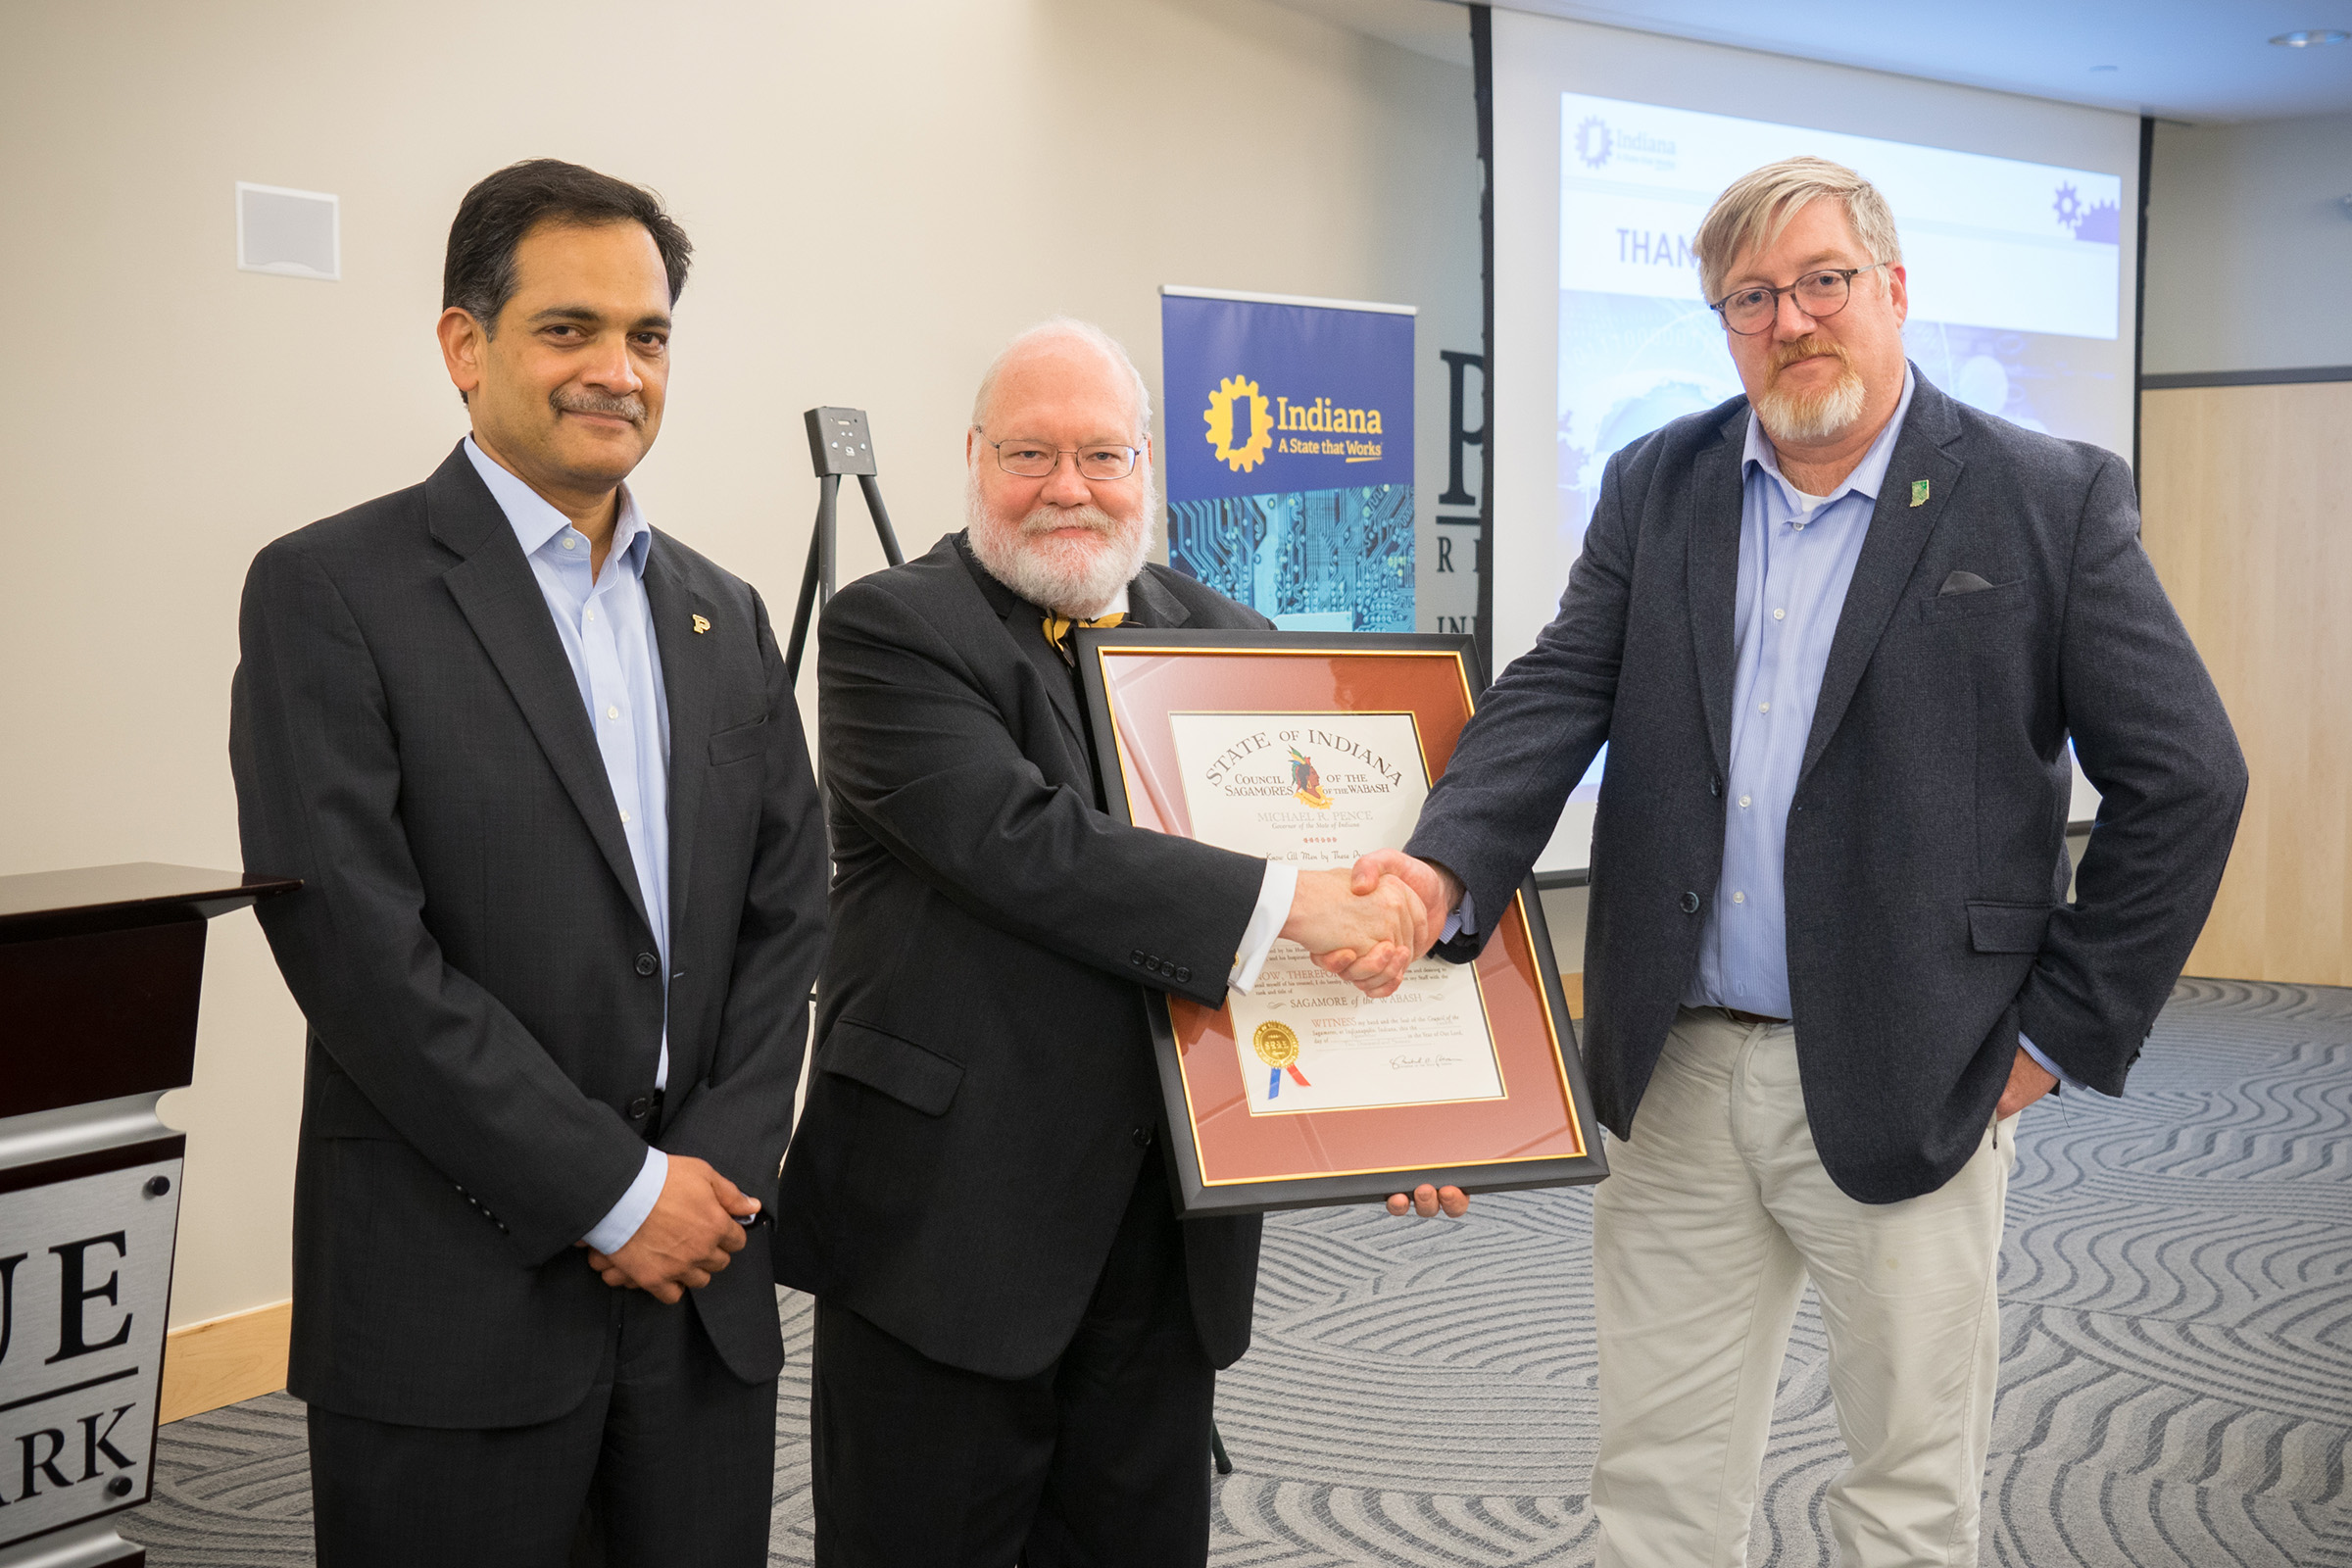 Pictured with Eugene Spafford are Suresh Garimella (left), Purdue's executive vice president for research and partnerships, and Douglas Rapp, adviser for cyber and national security initiatives at Indiana Economic Development Corporation